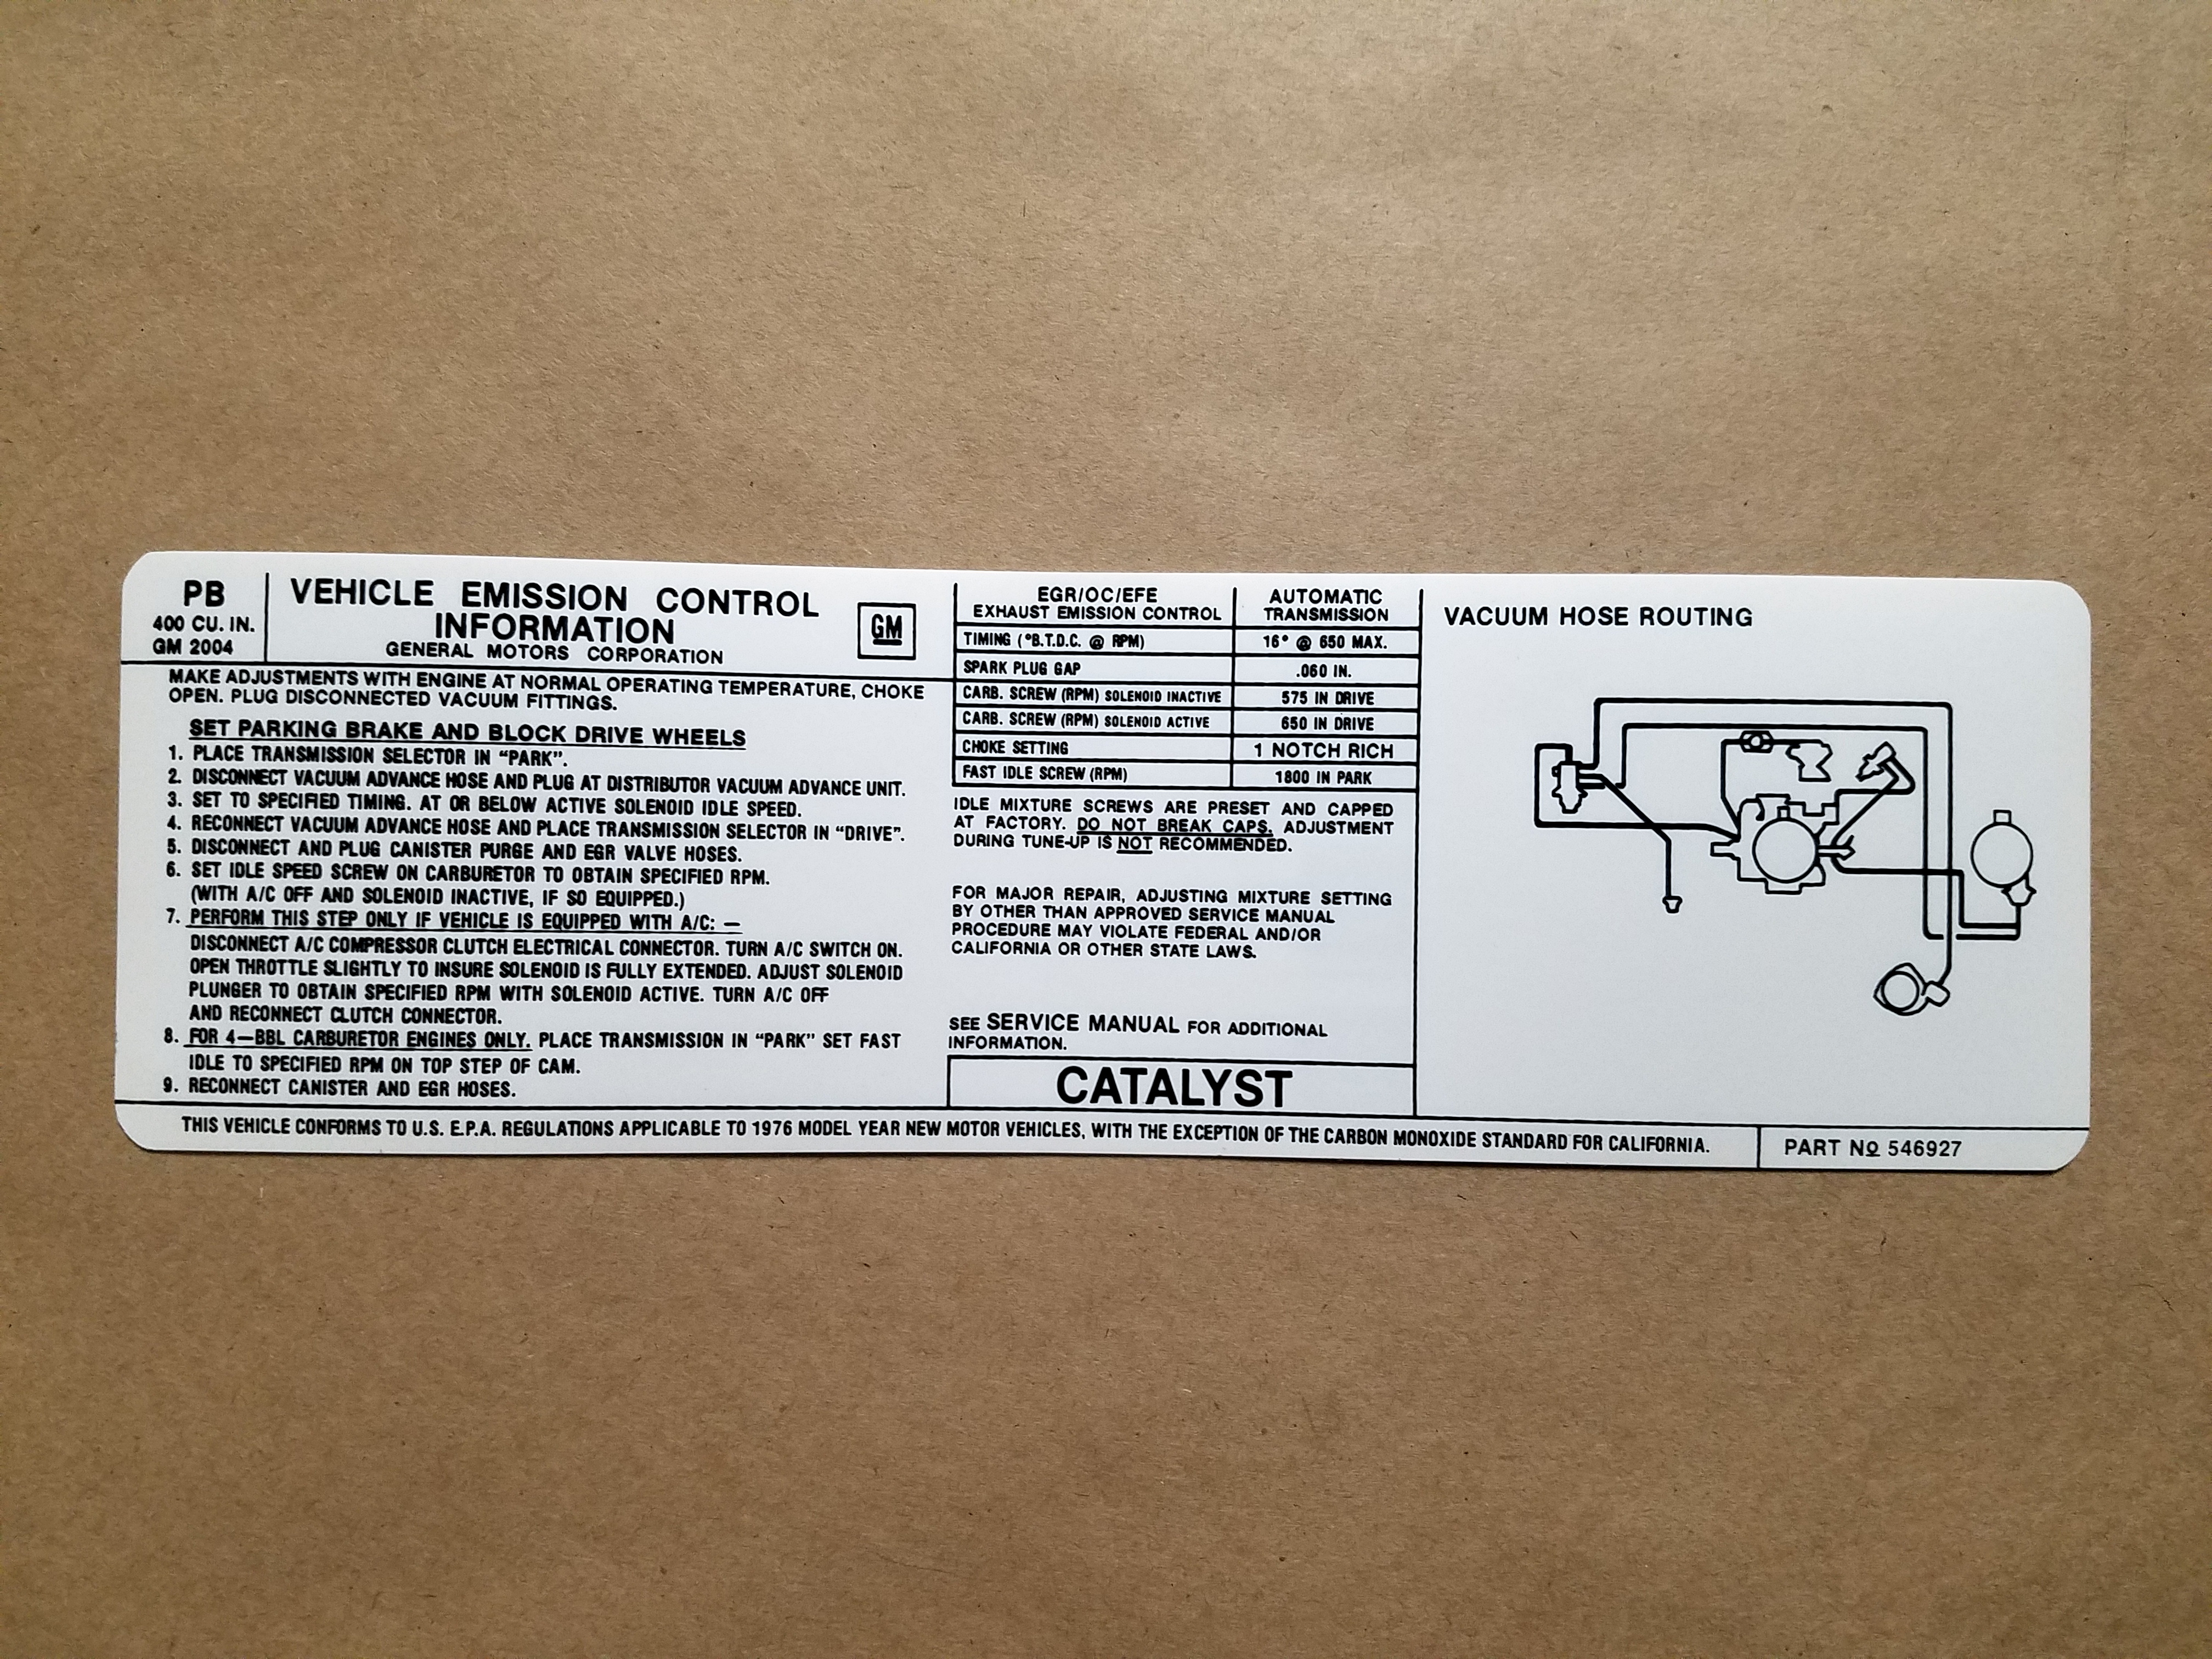 1976 400 AT Emission decal US (On Decal: PB 546927)..